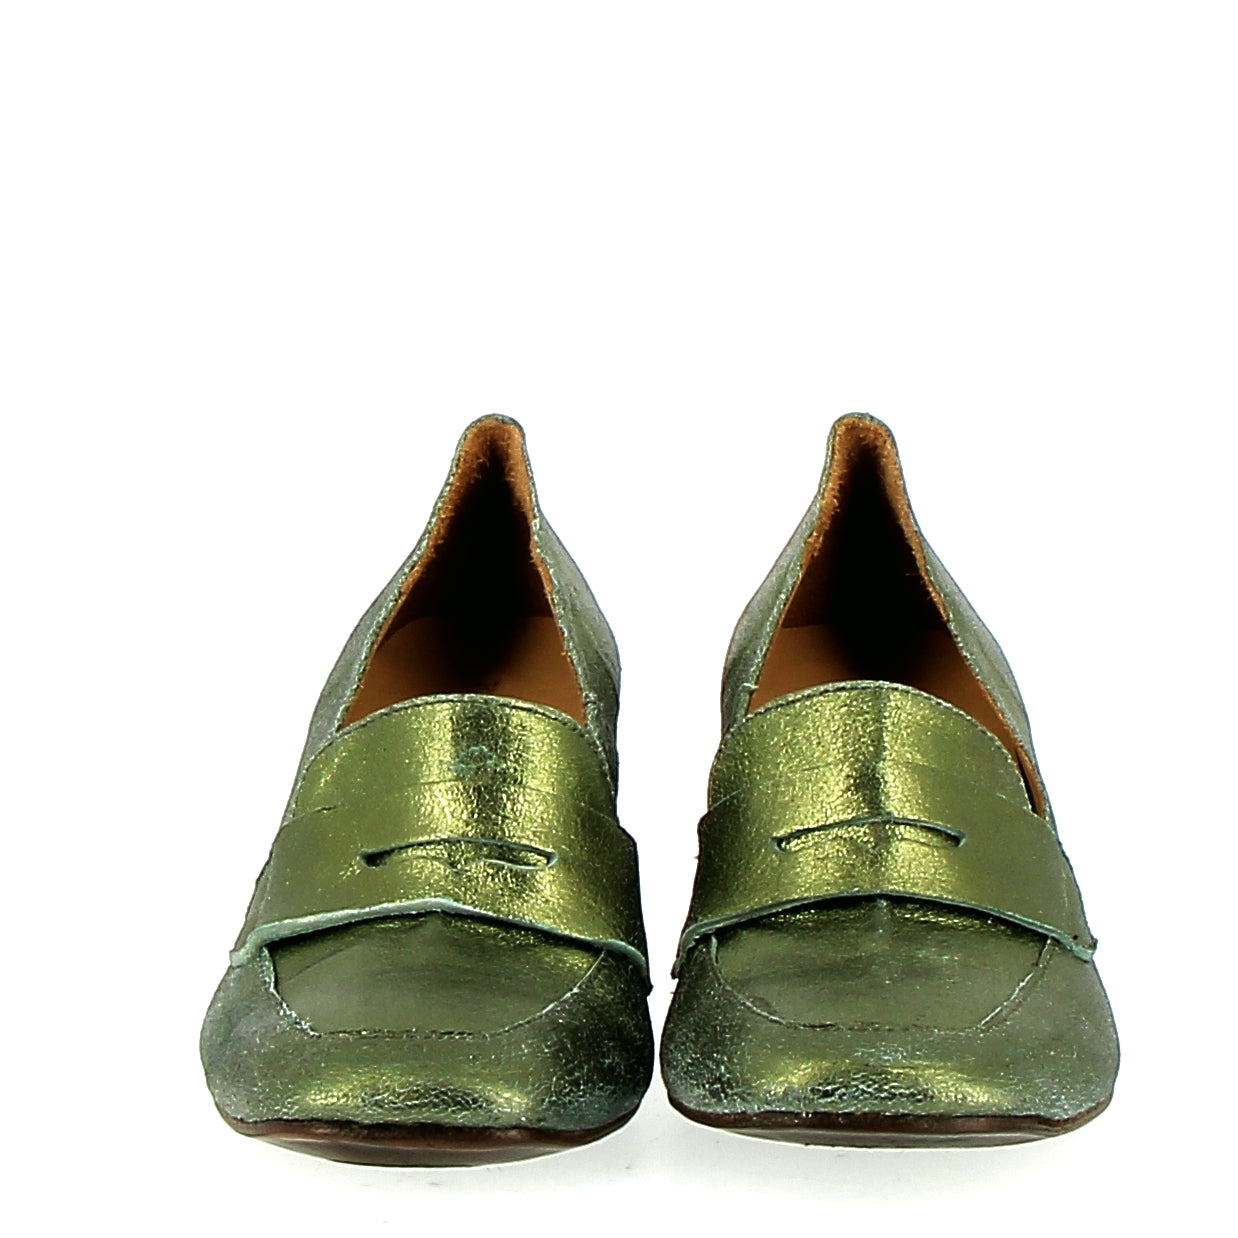 Soft green metal moccasin on the heel